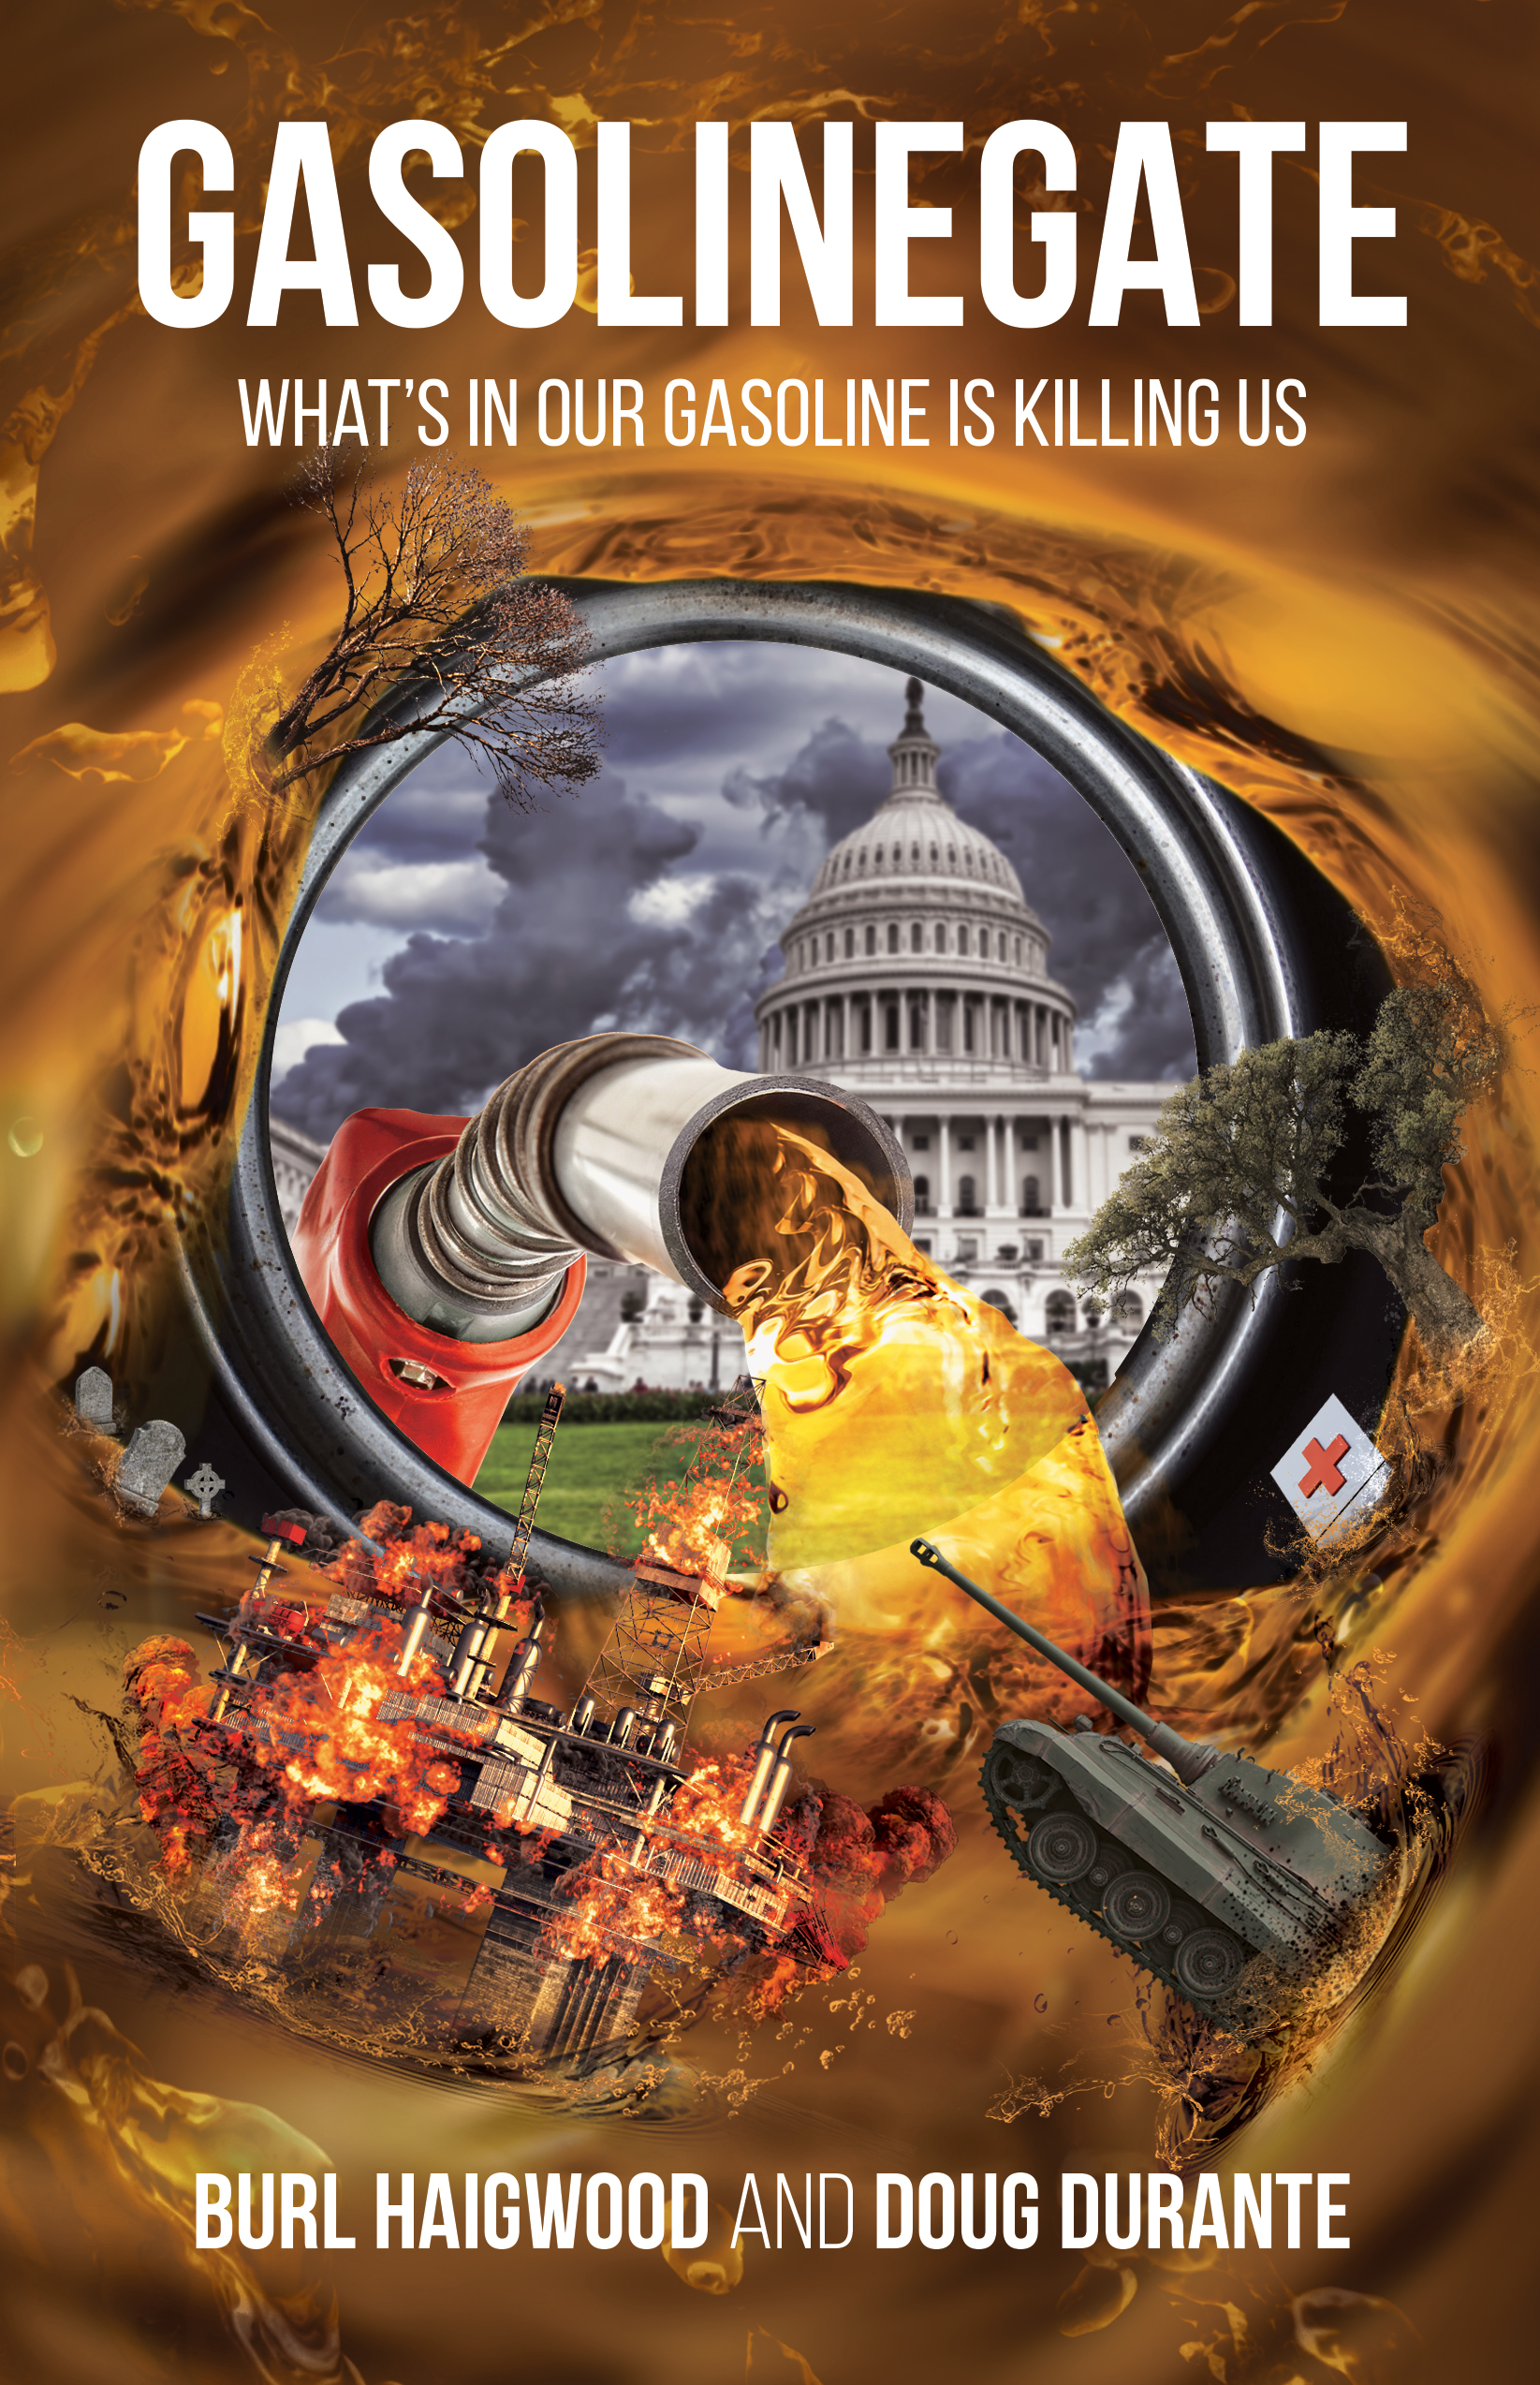 New Book Exposes U.S. Failure to Clean up Gasoline & Develop Alternatives